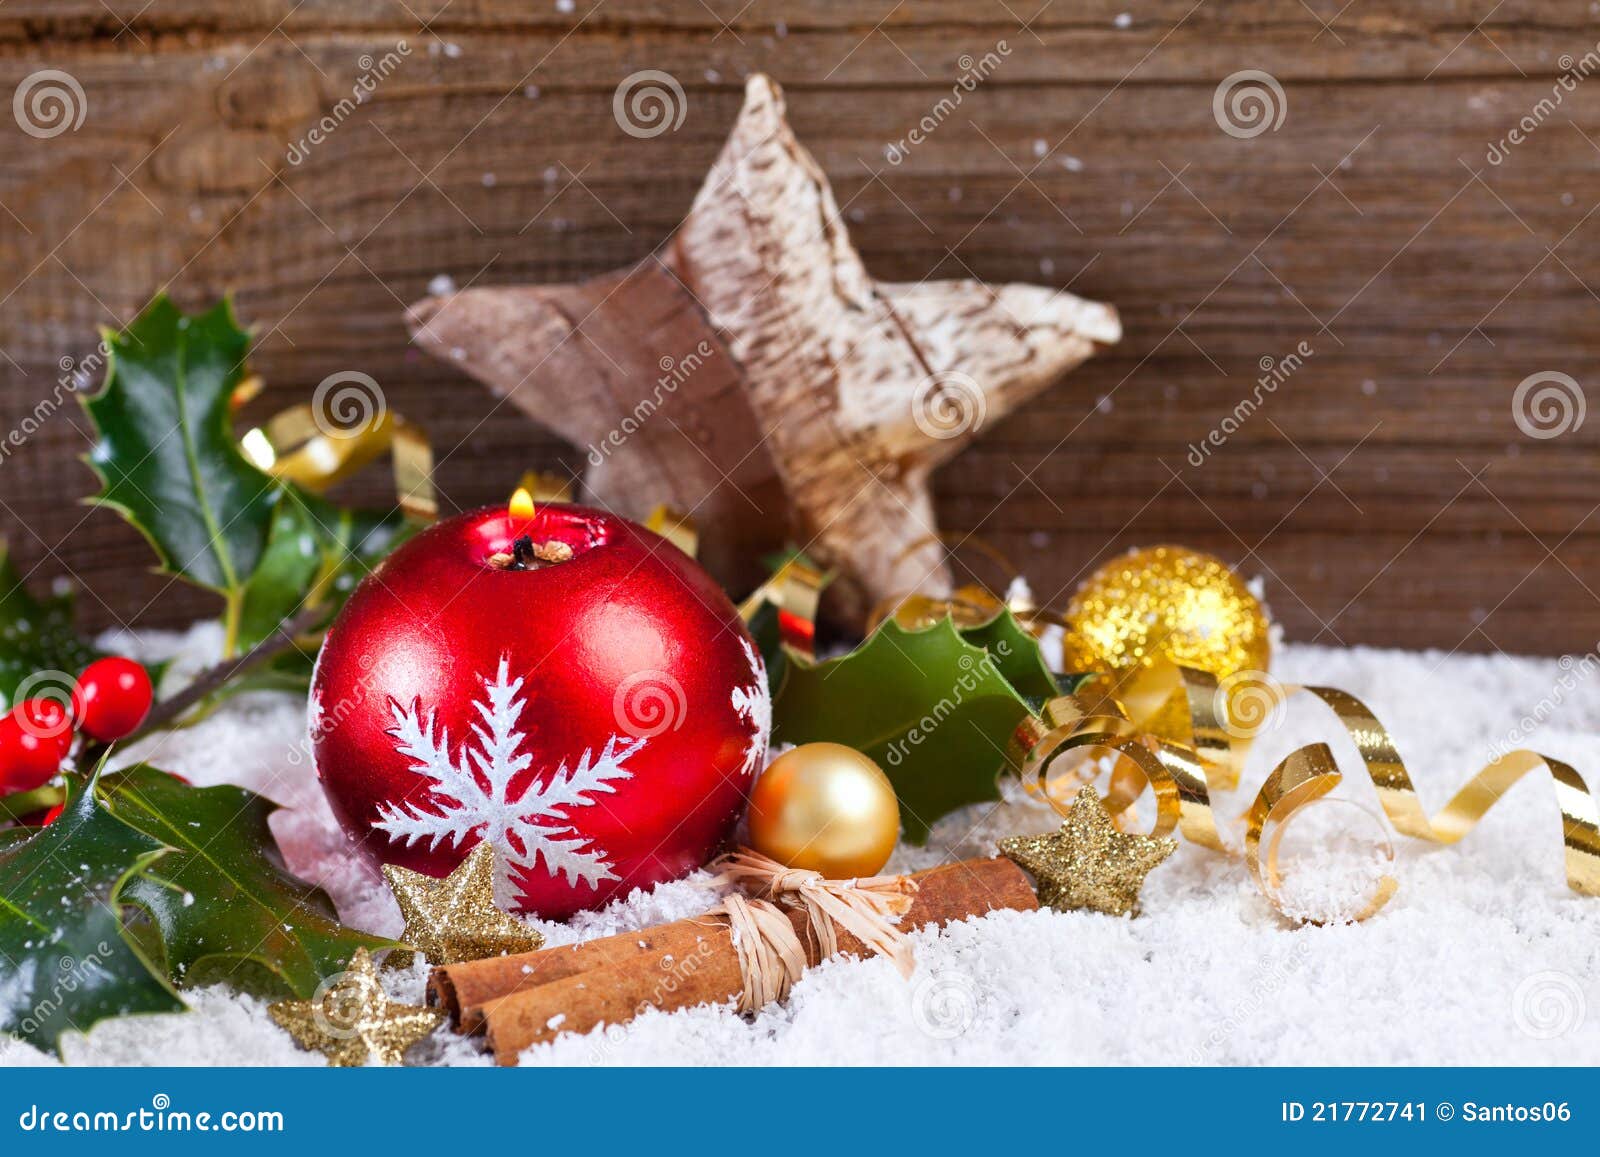 Christmas Background with Candle and Decoration Stock Image - Image of ...